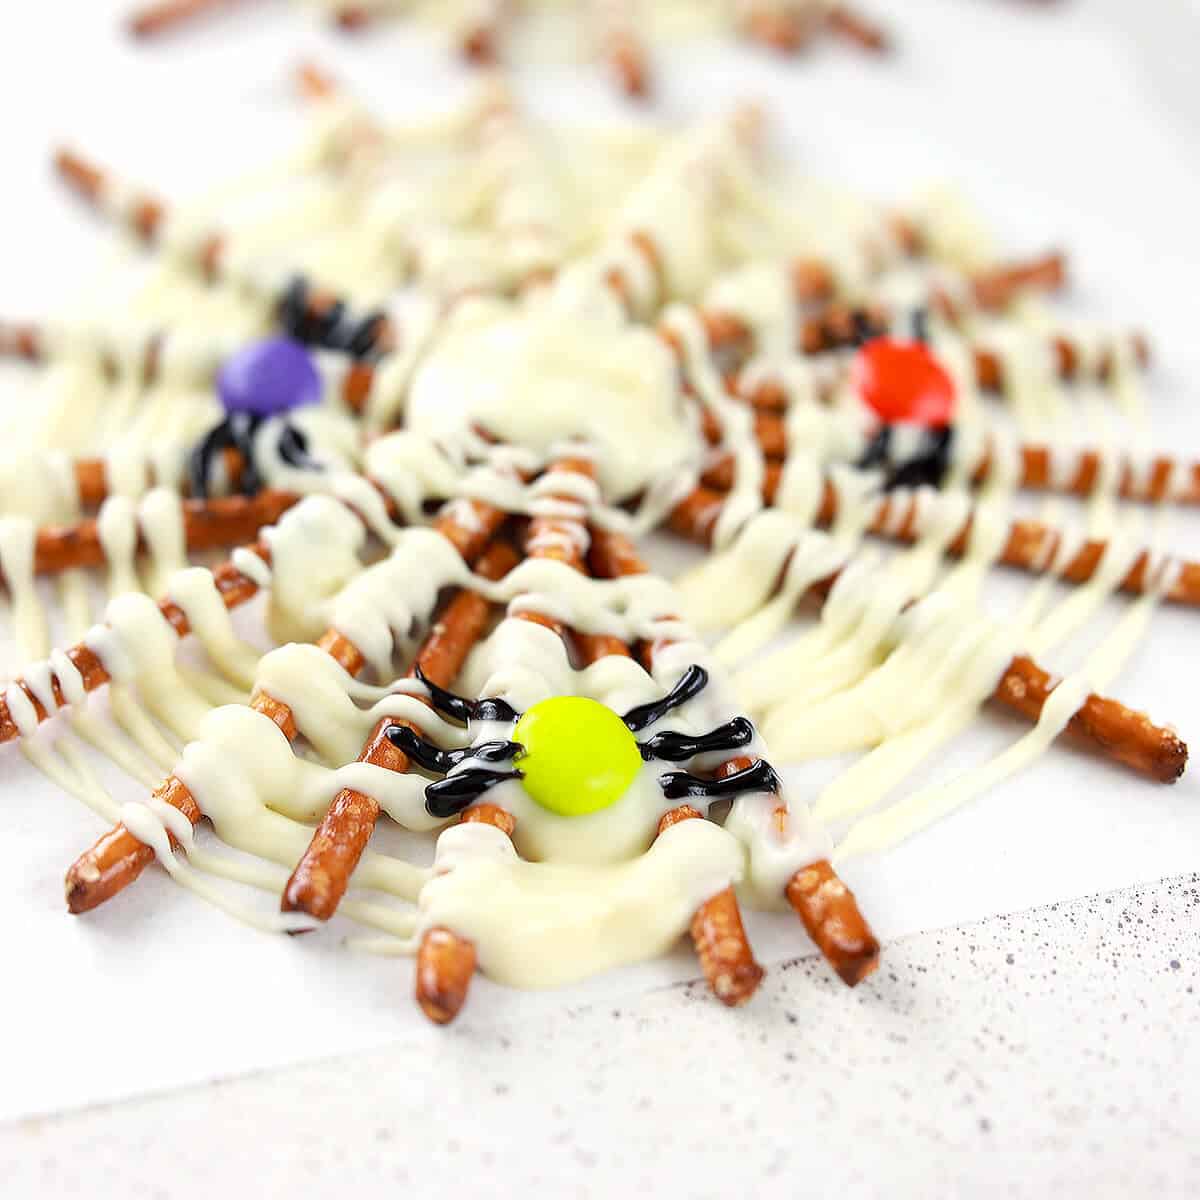 A white chocolate and M&M spider on a chocolate spiderweb.